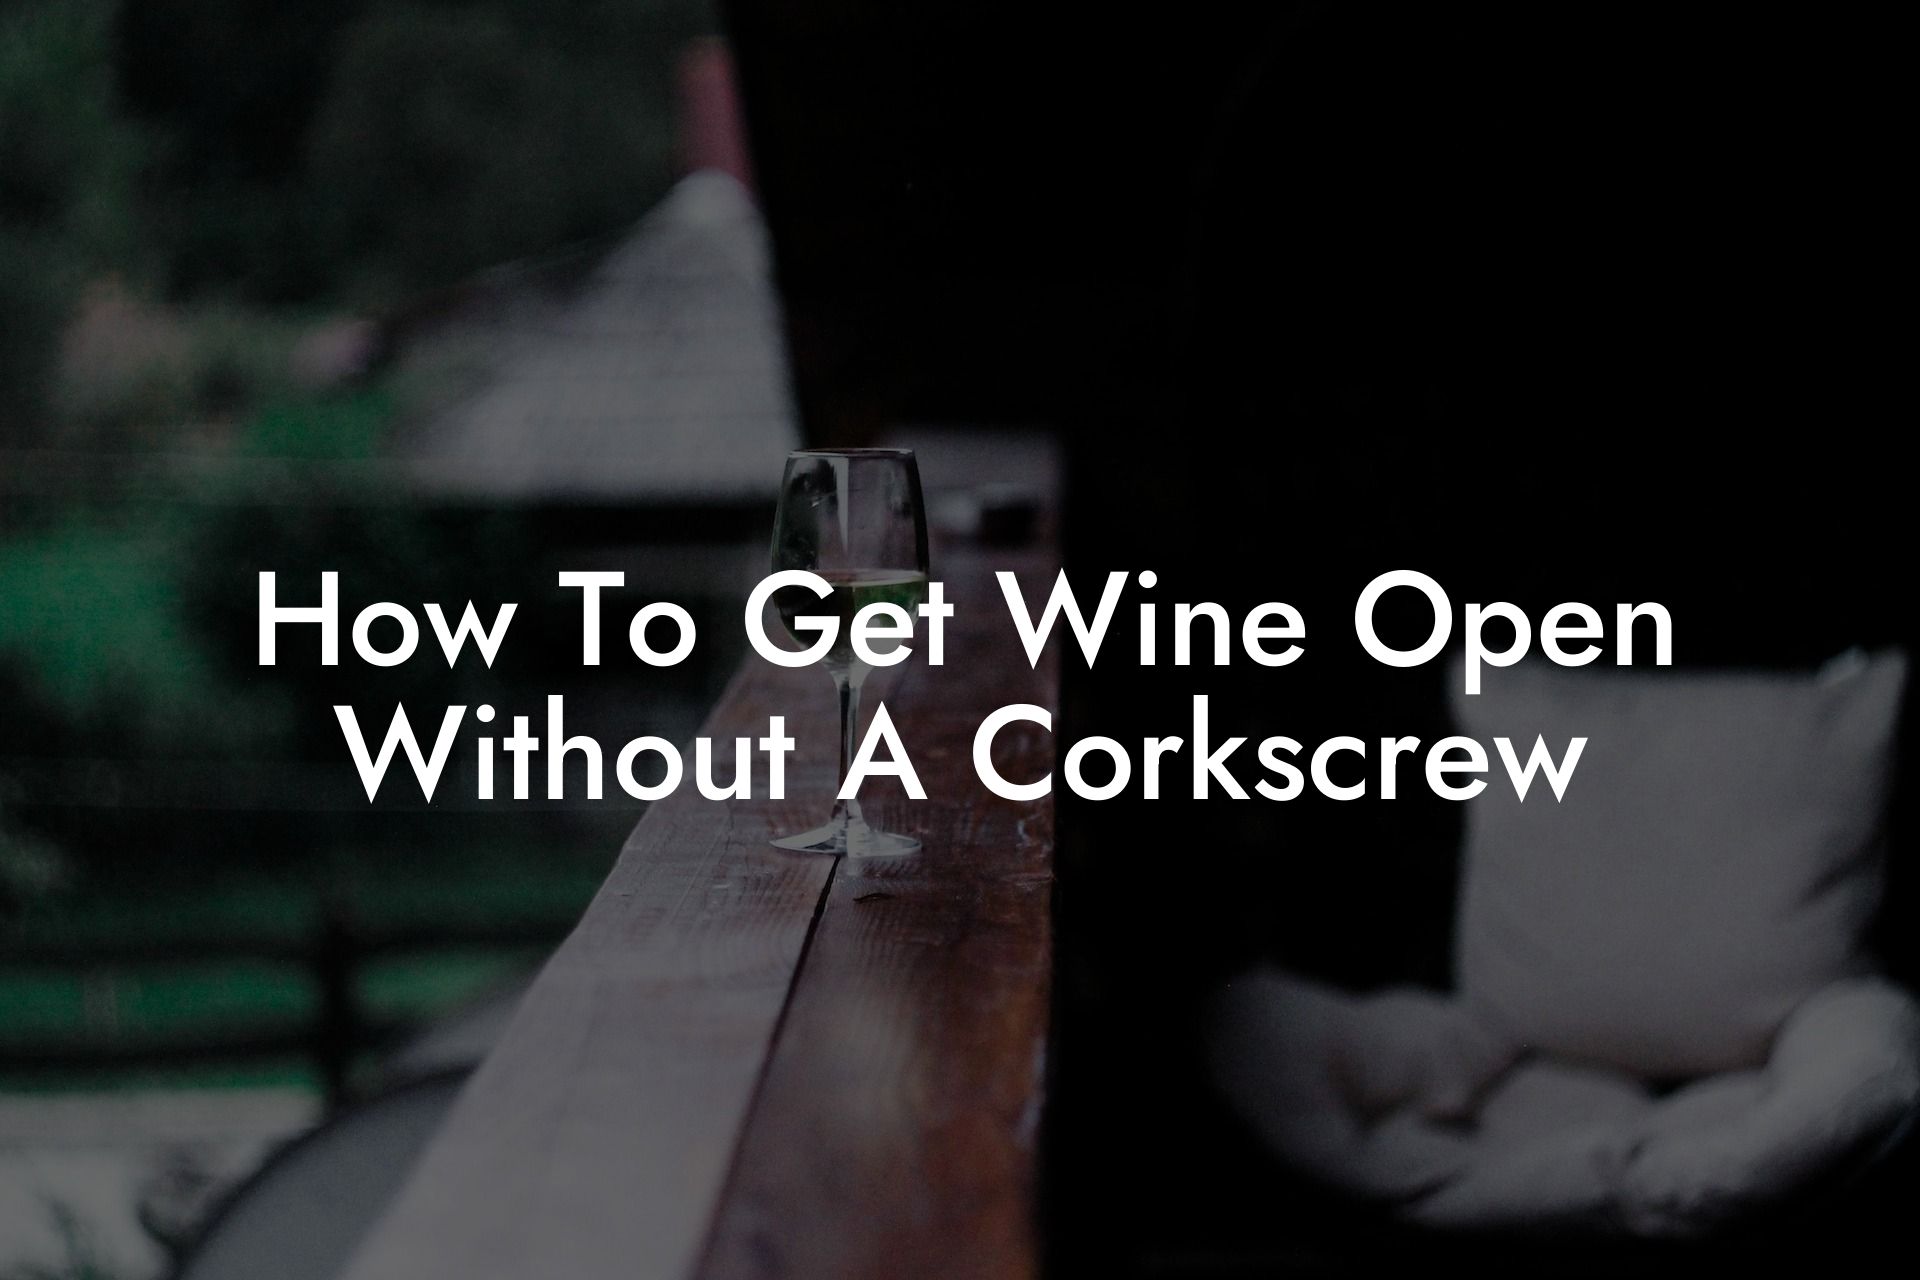 How To Get Wine Open Without A Corkscrew